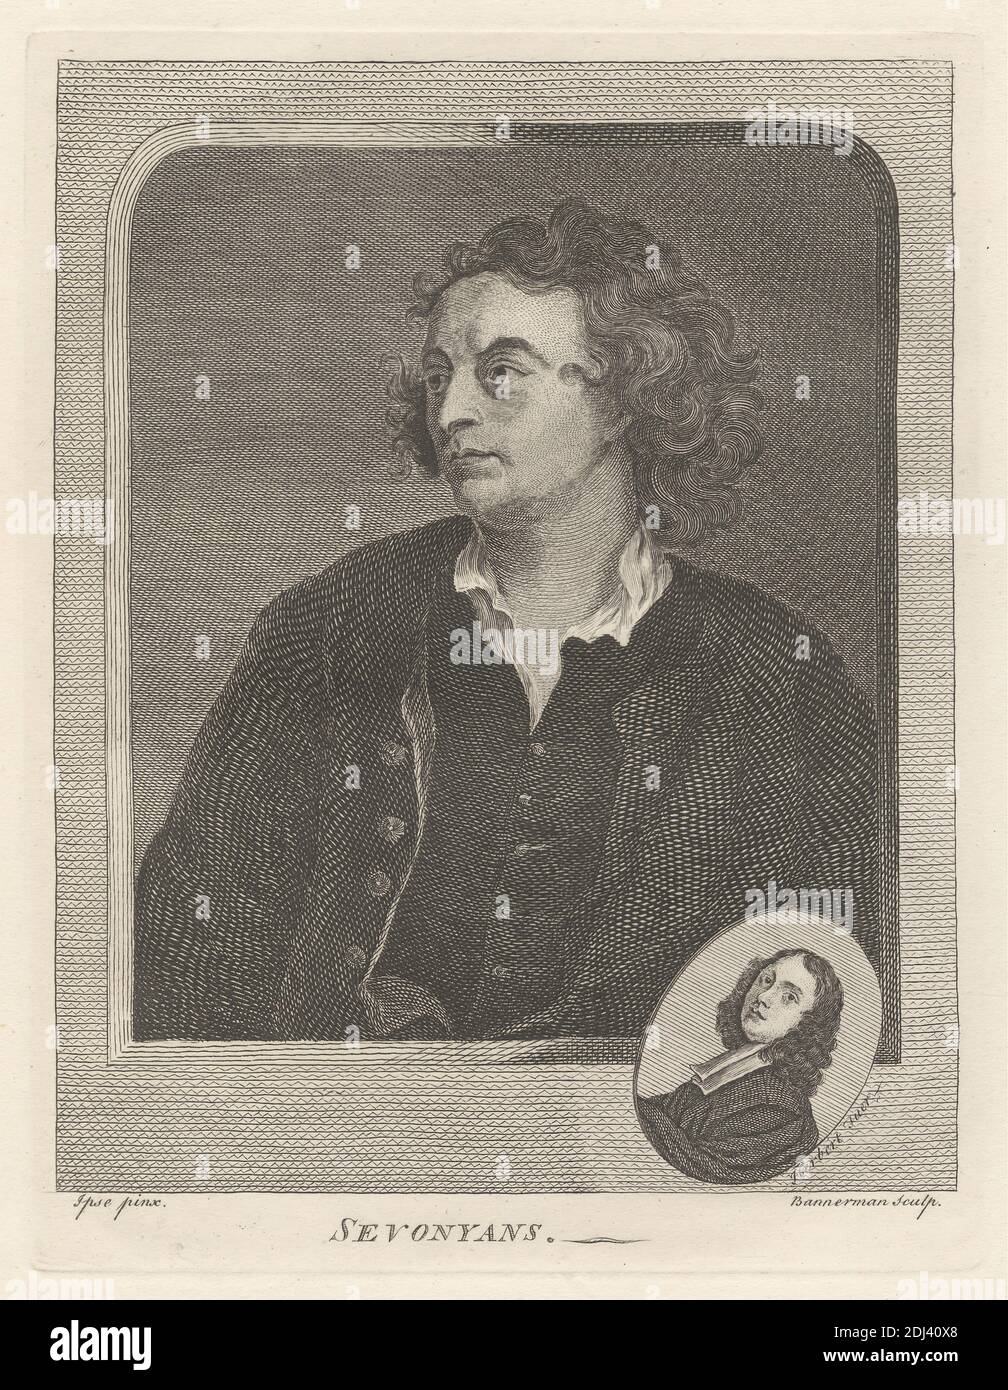 Sevonyans and Herbert Tuer, Alexander Bannerman, ca. 1730–1780, 1762, Line engraving on medium, slightly textured, cream wove paper, Sheet: 12 x 9 1/4 inches (30.5 x 23.5 cm), Plate: 7 1/4 x 5 1/2 inches (18.4 x 14 cm), and Image: 6 1/2 x 5 1/8 inches (16.5 x 13 cm), men, portrait Stock Photo